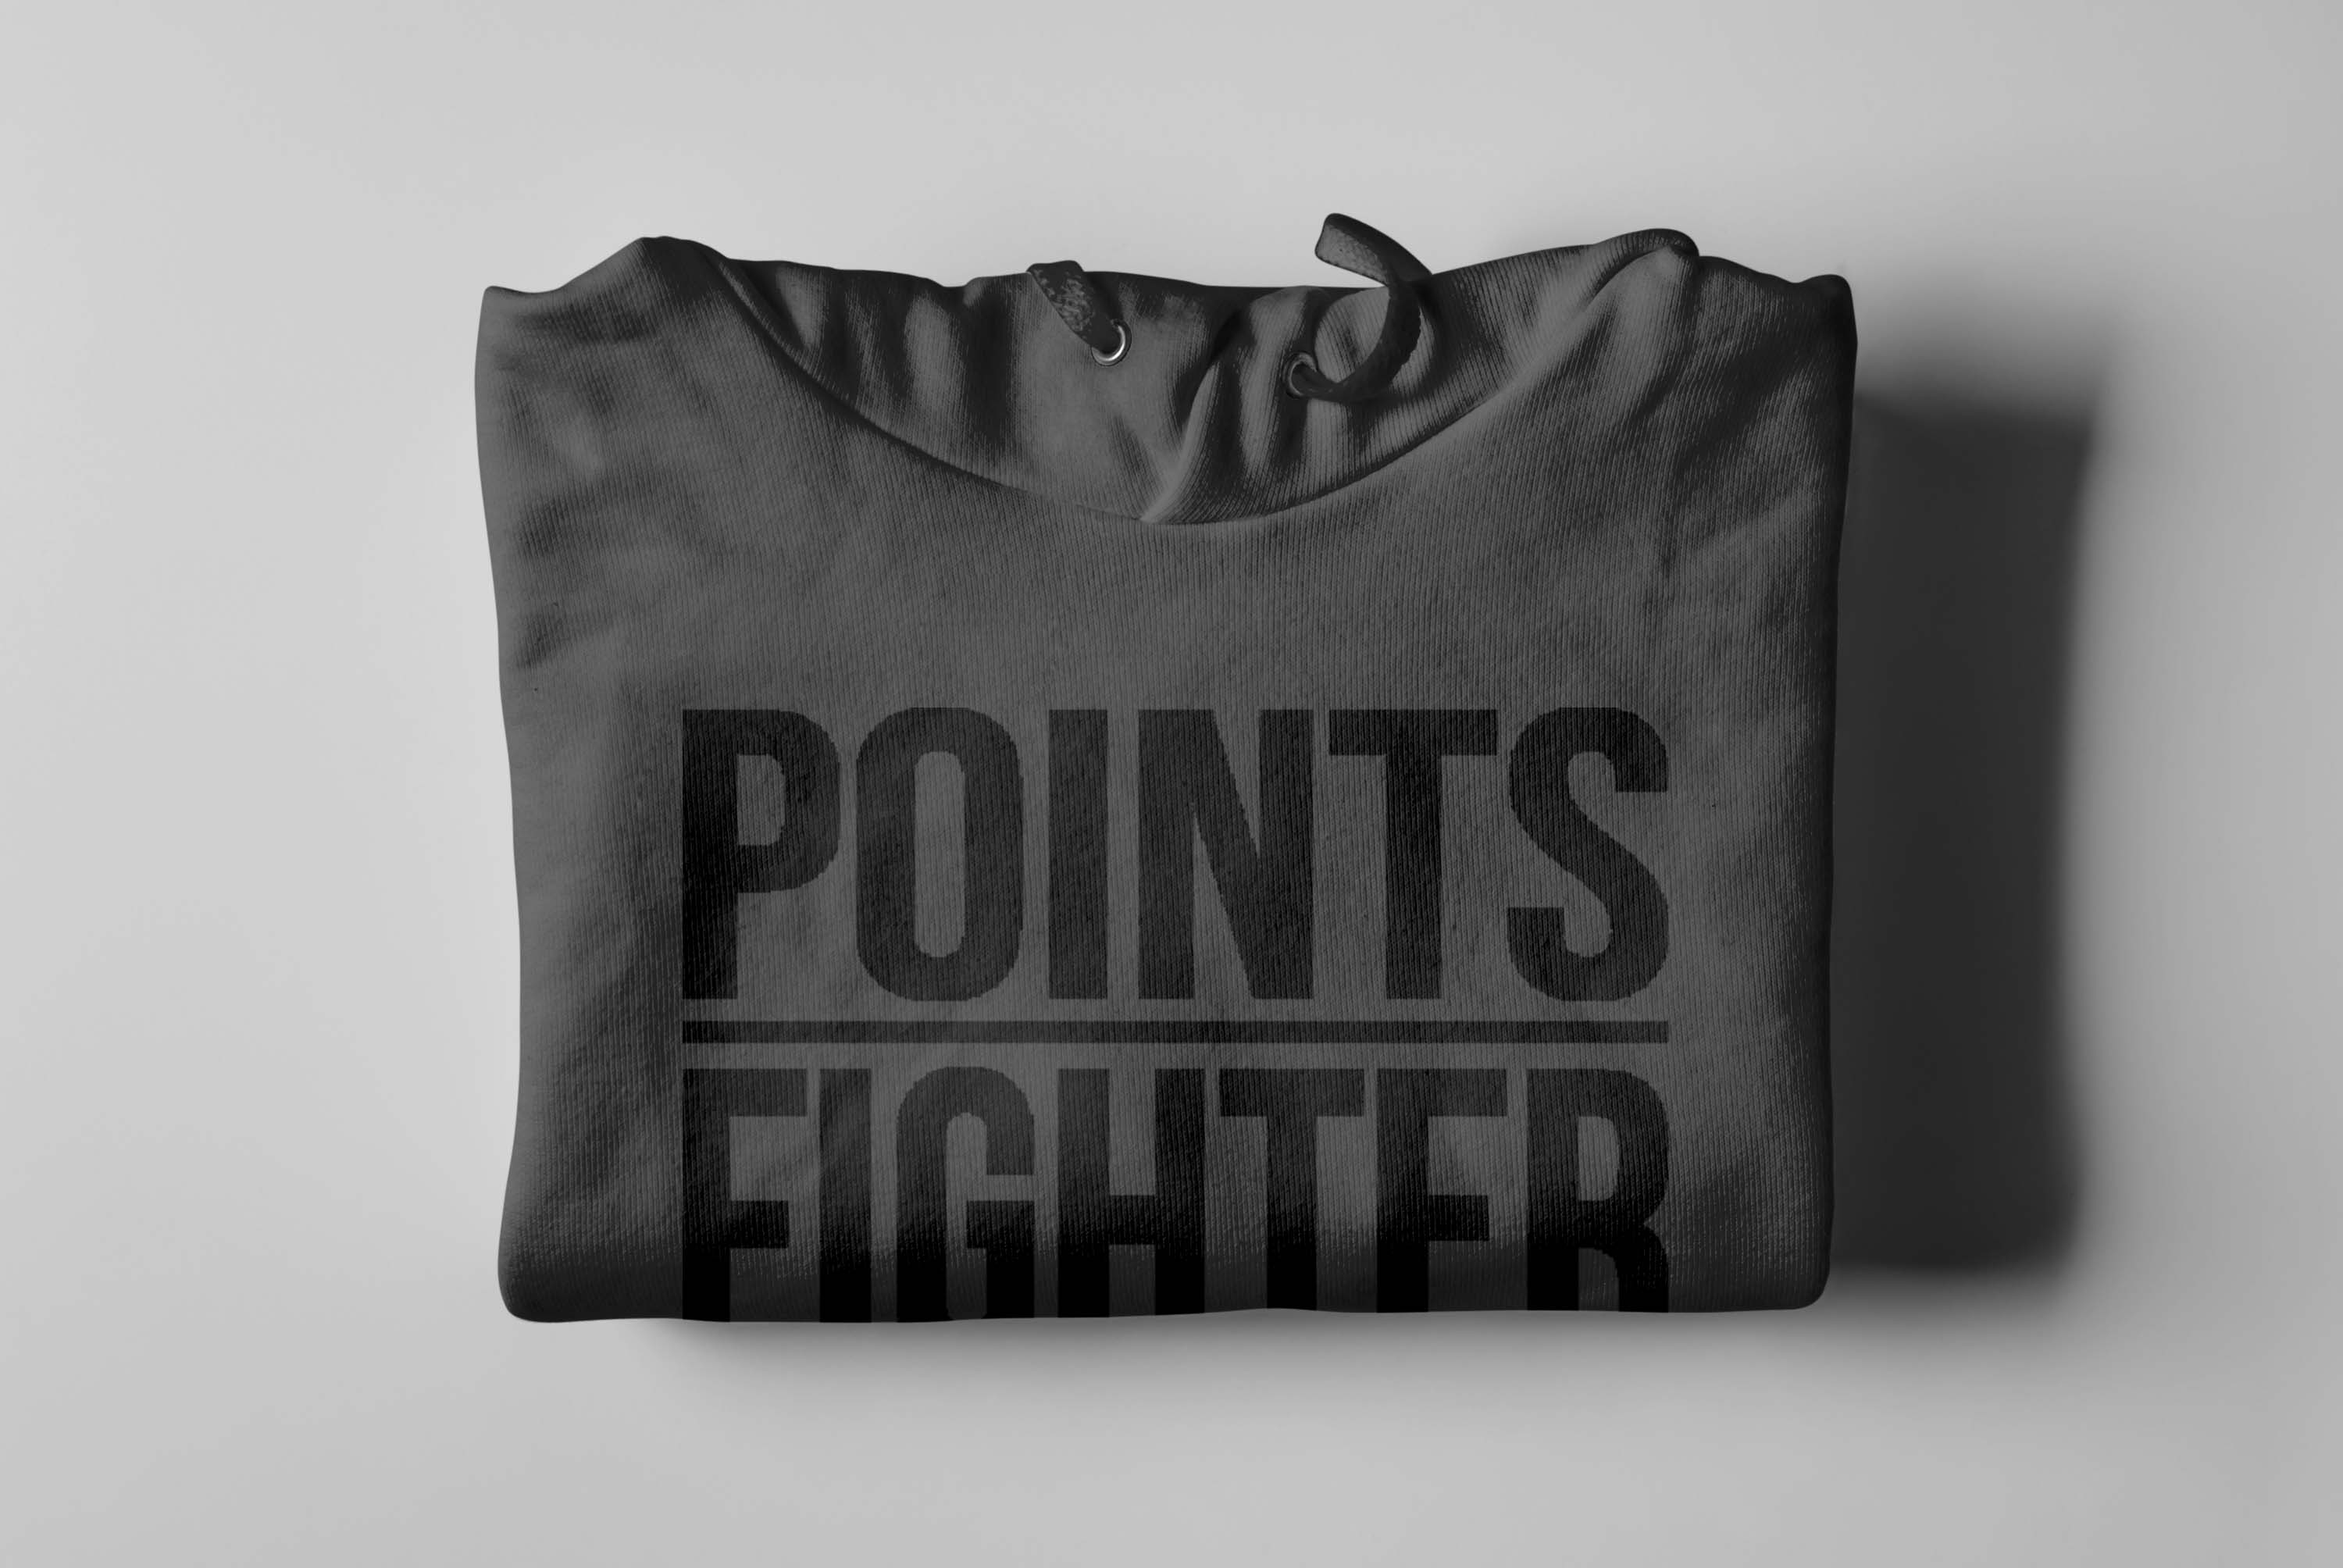 Points Fighter Hoodie - Blackout